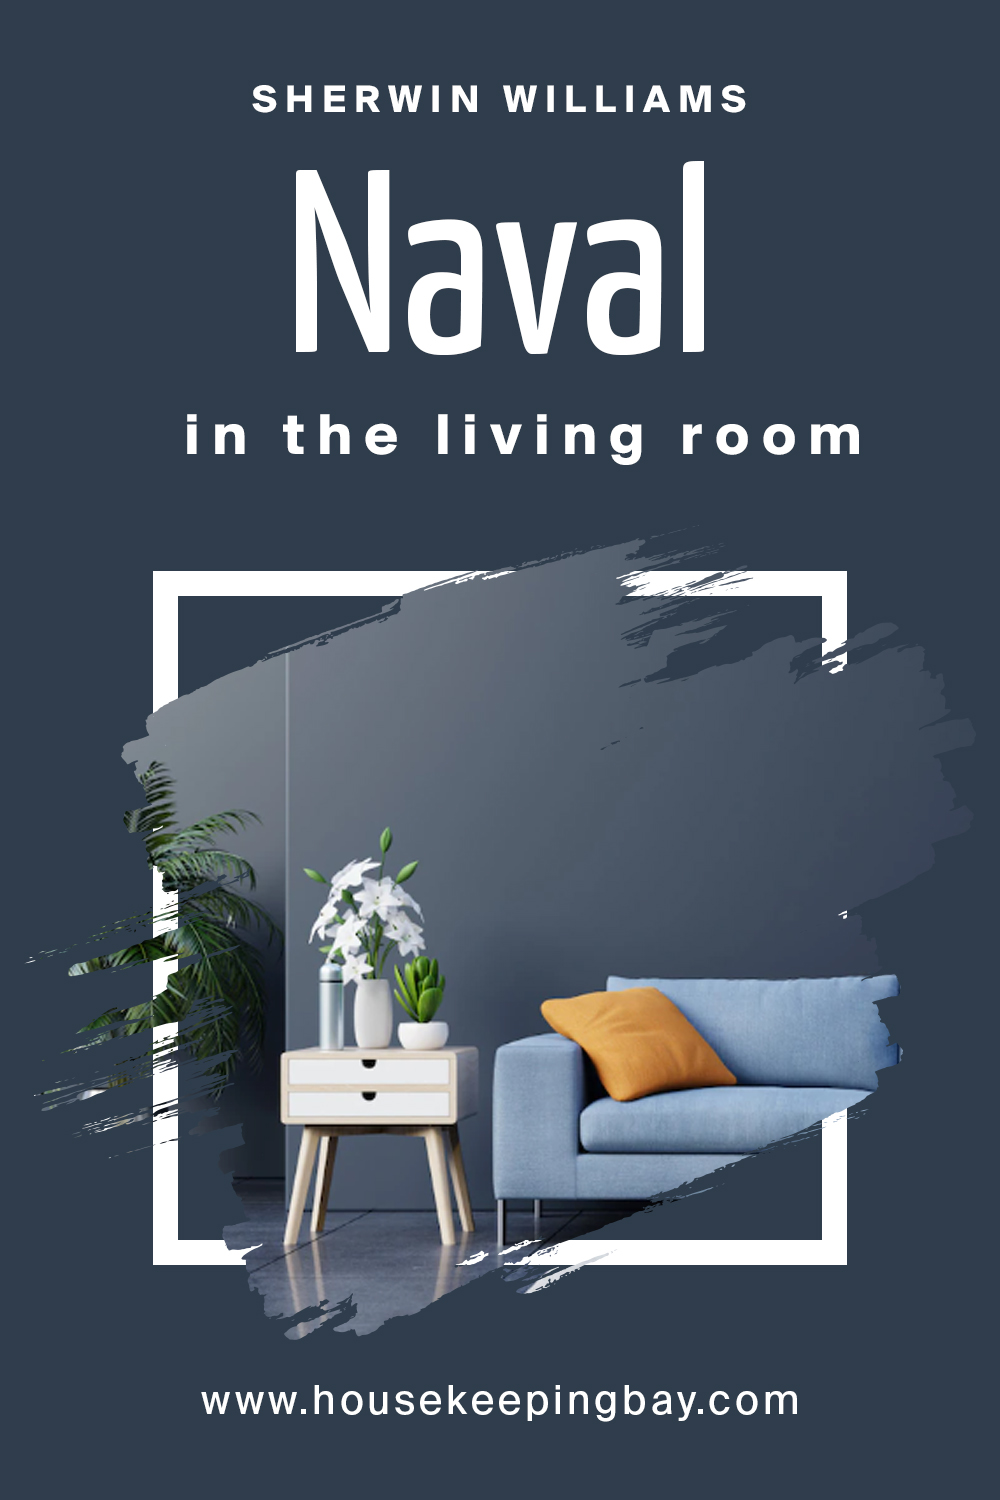 Sherwin Williams. Naval In the Living Room